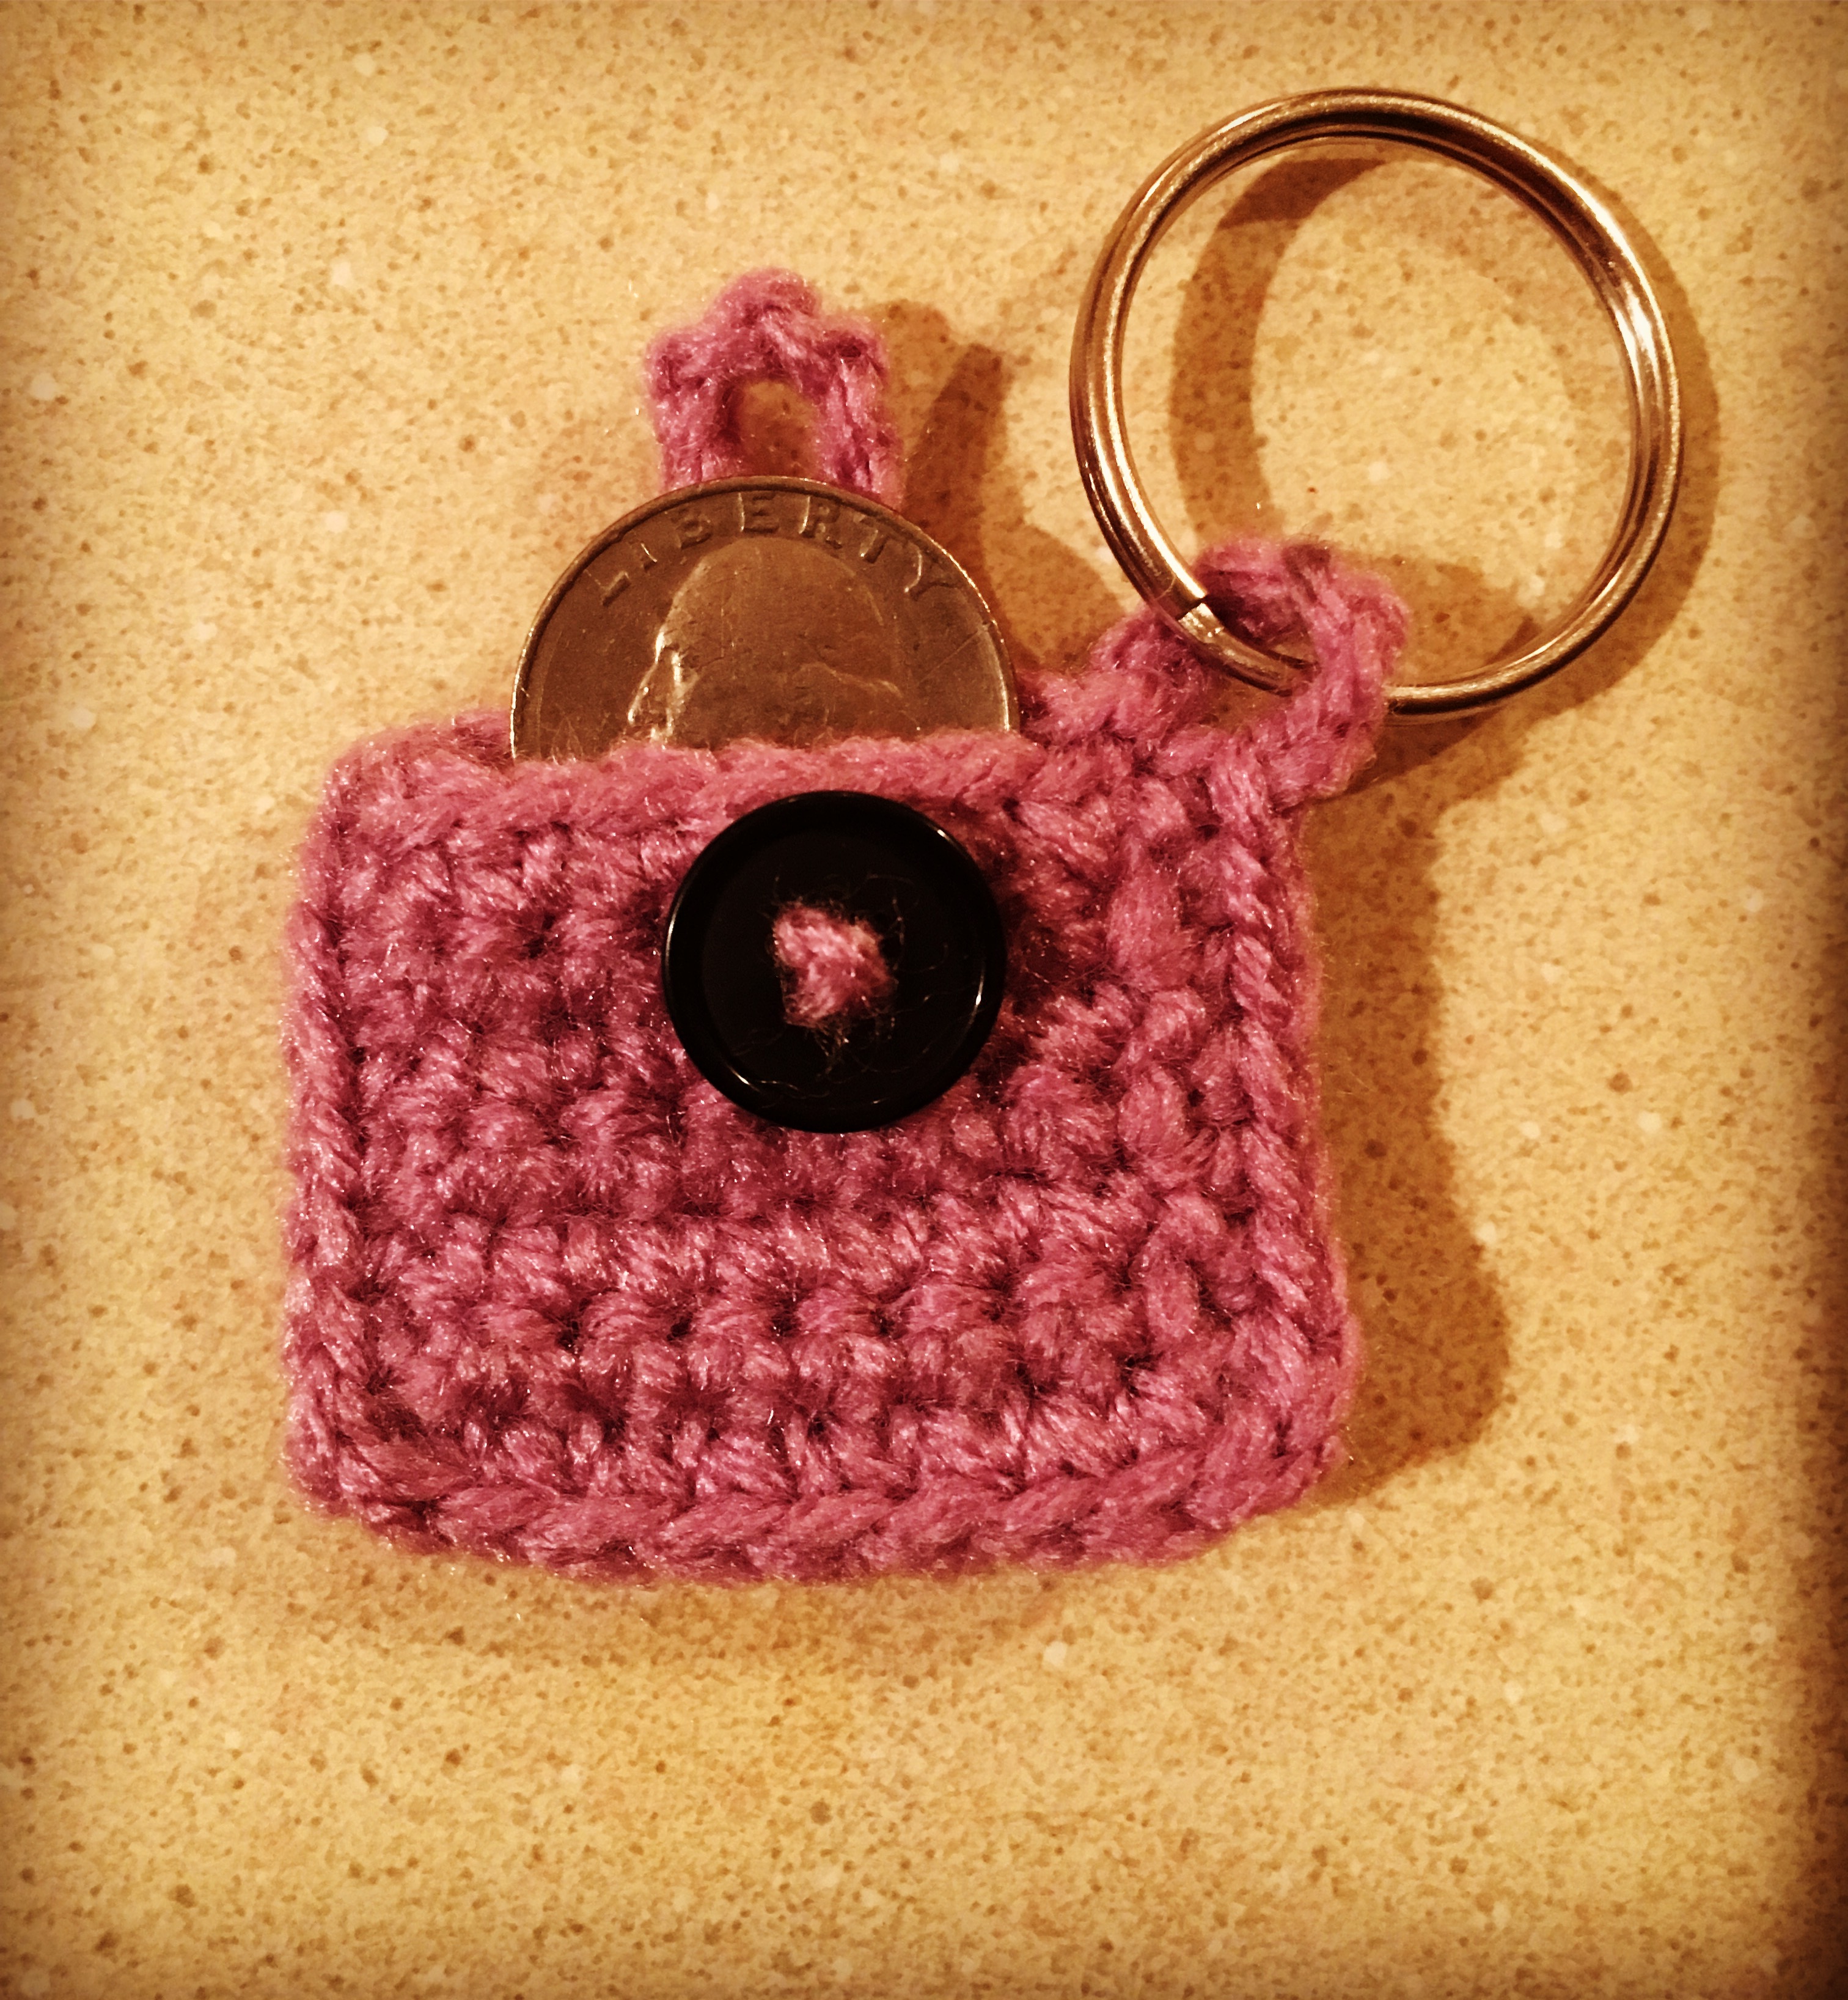 These Crochet Keychain Ideas Make Quick and Easy Handmade Gifts